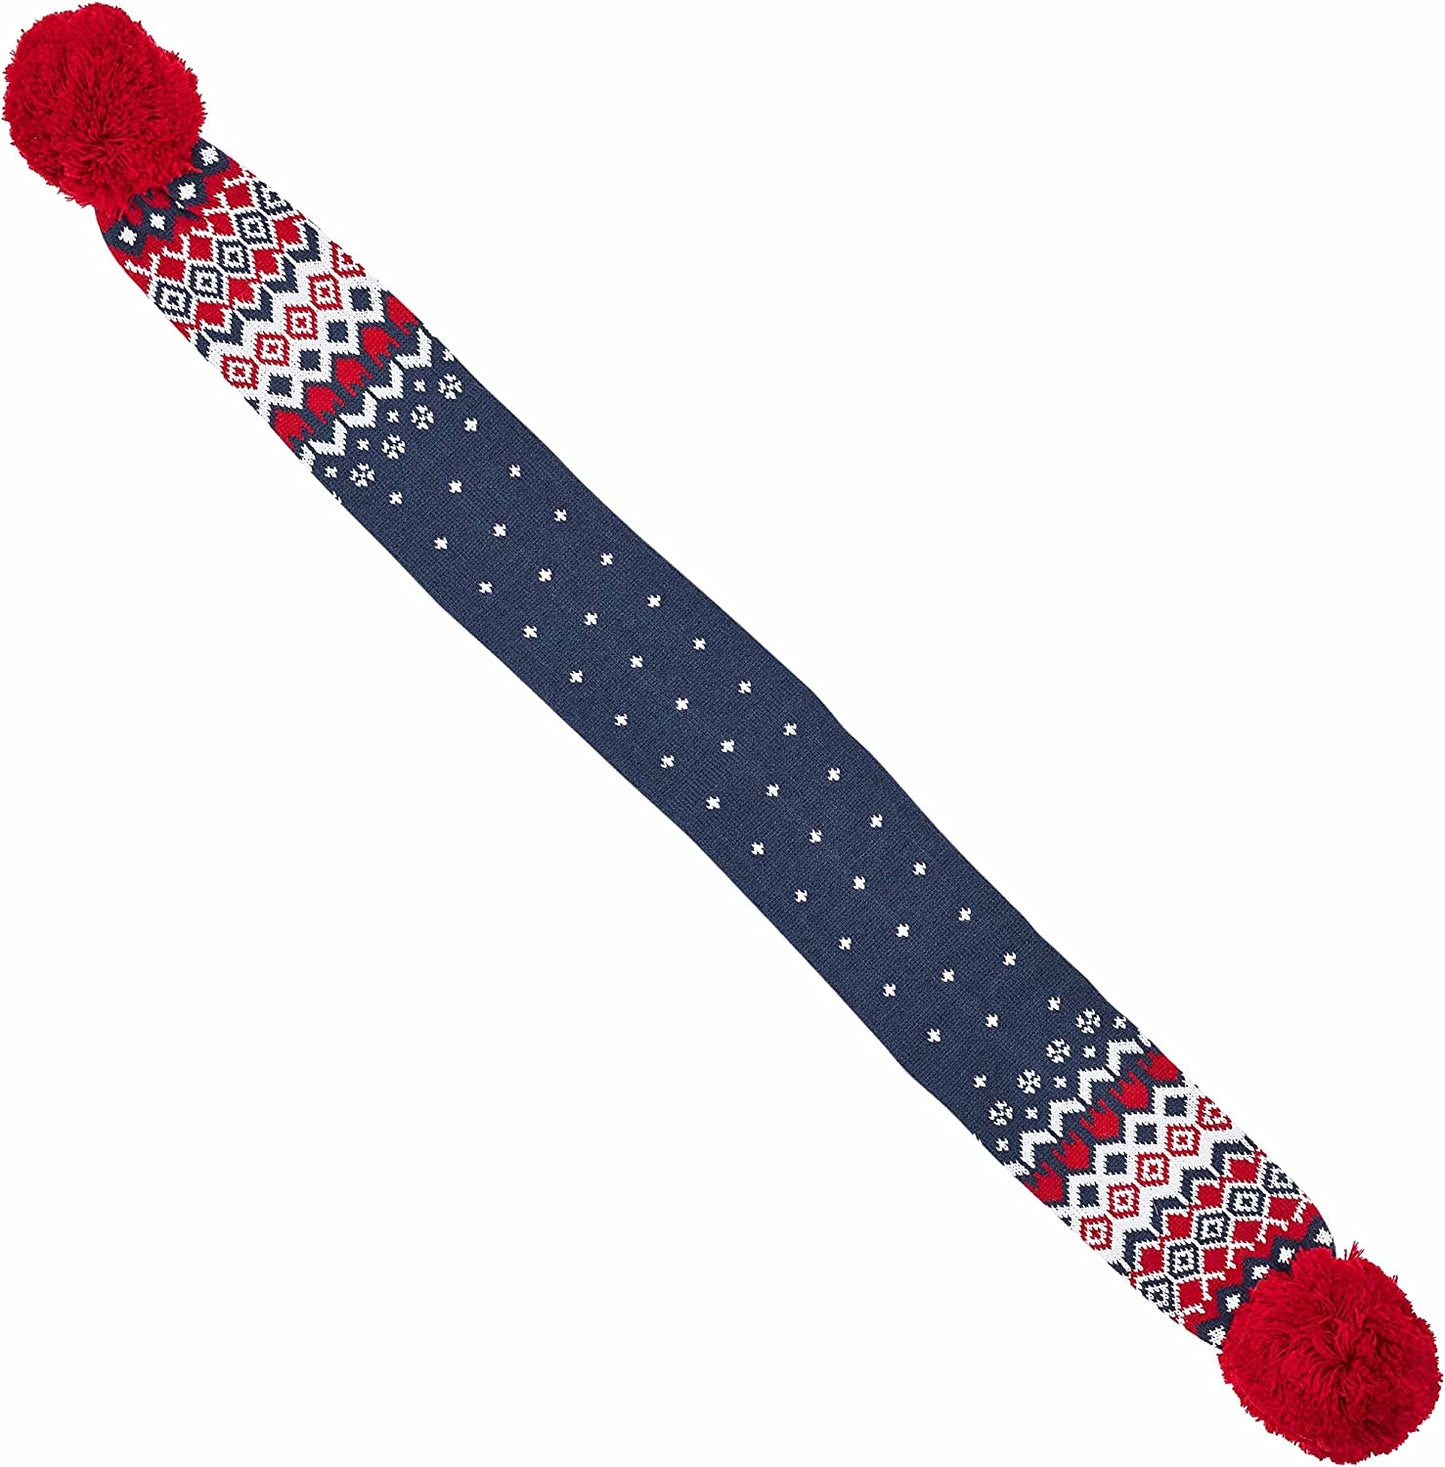 Blueberry Pet 2022/2023 New Christmas Family Scarf for Dog, Holiday Festive Fair Isle Dog Scarf in Navy Blue, Small/Medium